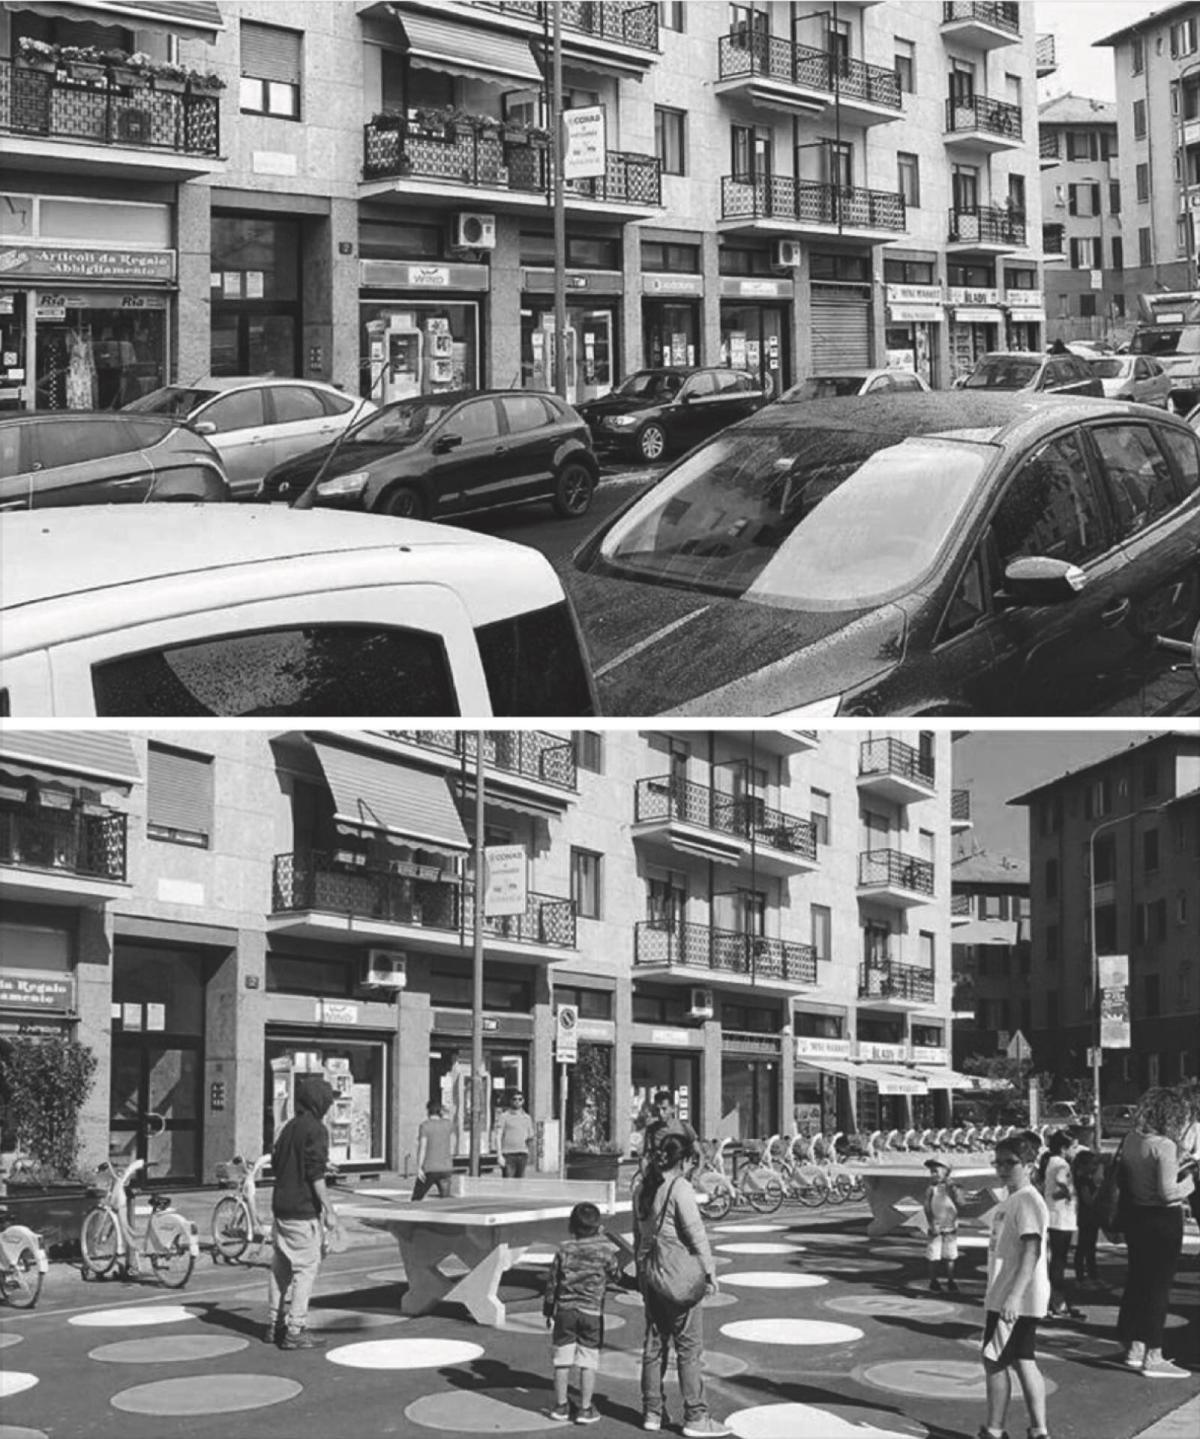 Two stacked black-and-white photographs show the same city block. In one, the view is dominated by cars. In the next, pedestrians wander around an open piazza with rows of parked bikes and ping pong tables.